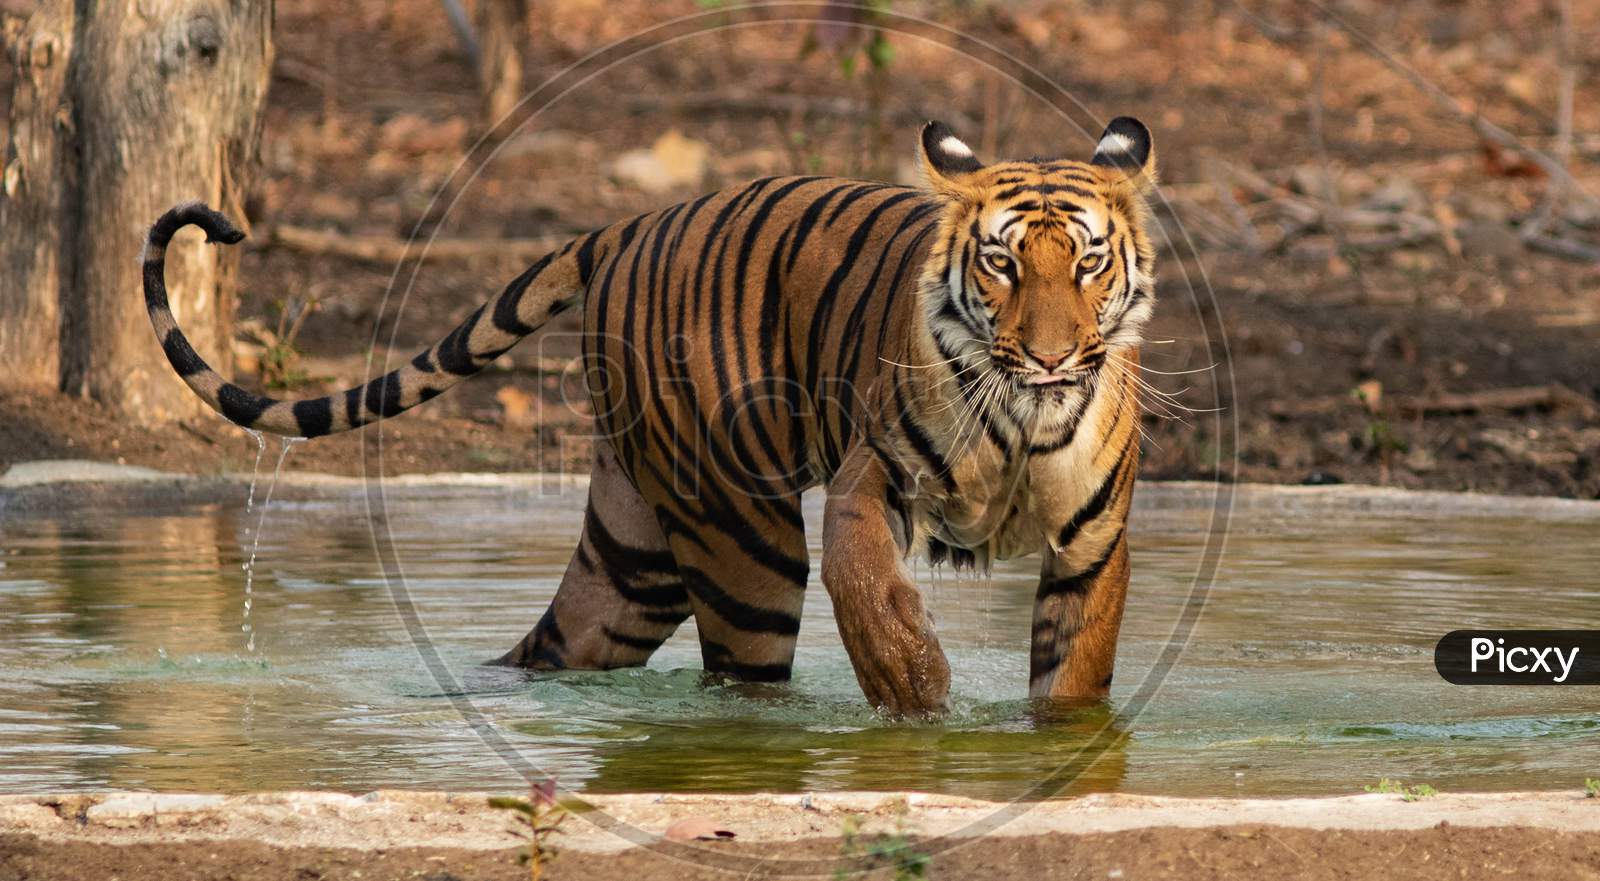 A Royal Bengal Tiger coming out from a pond in a forest